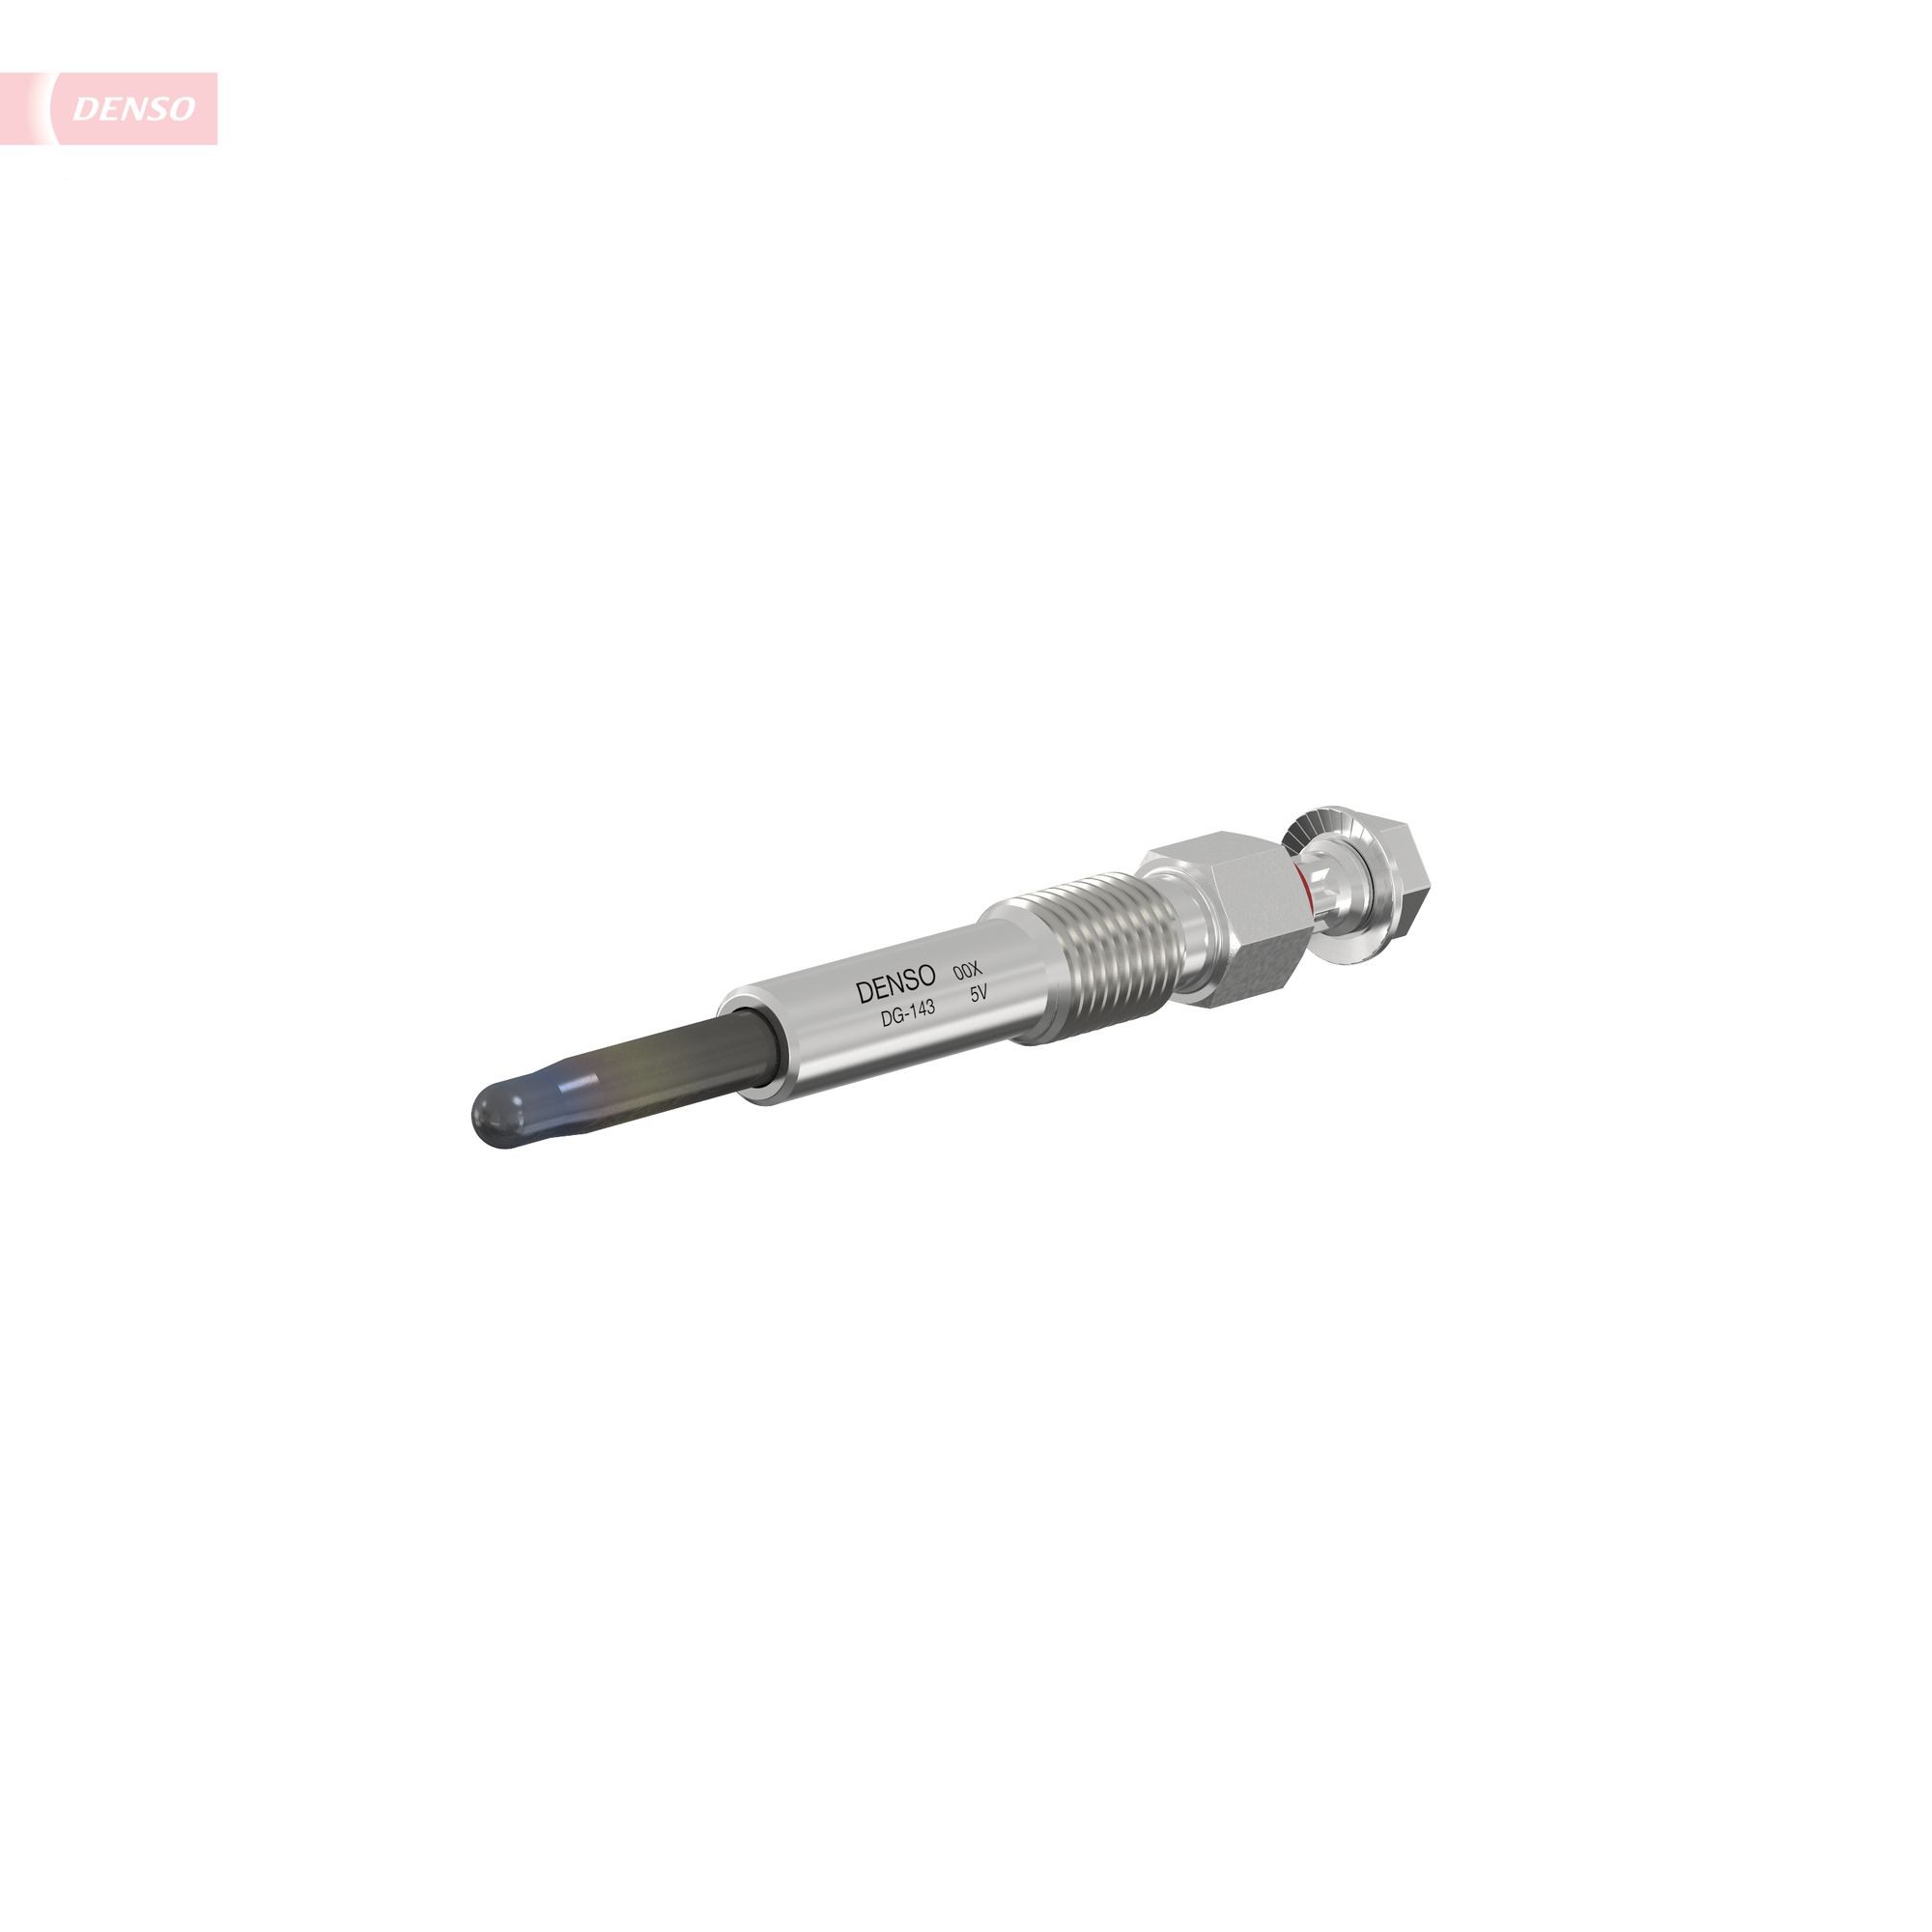 Great value for money - DENSO Glow plug DG-143